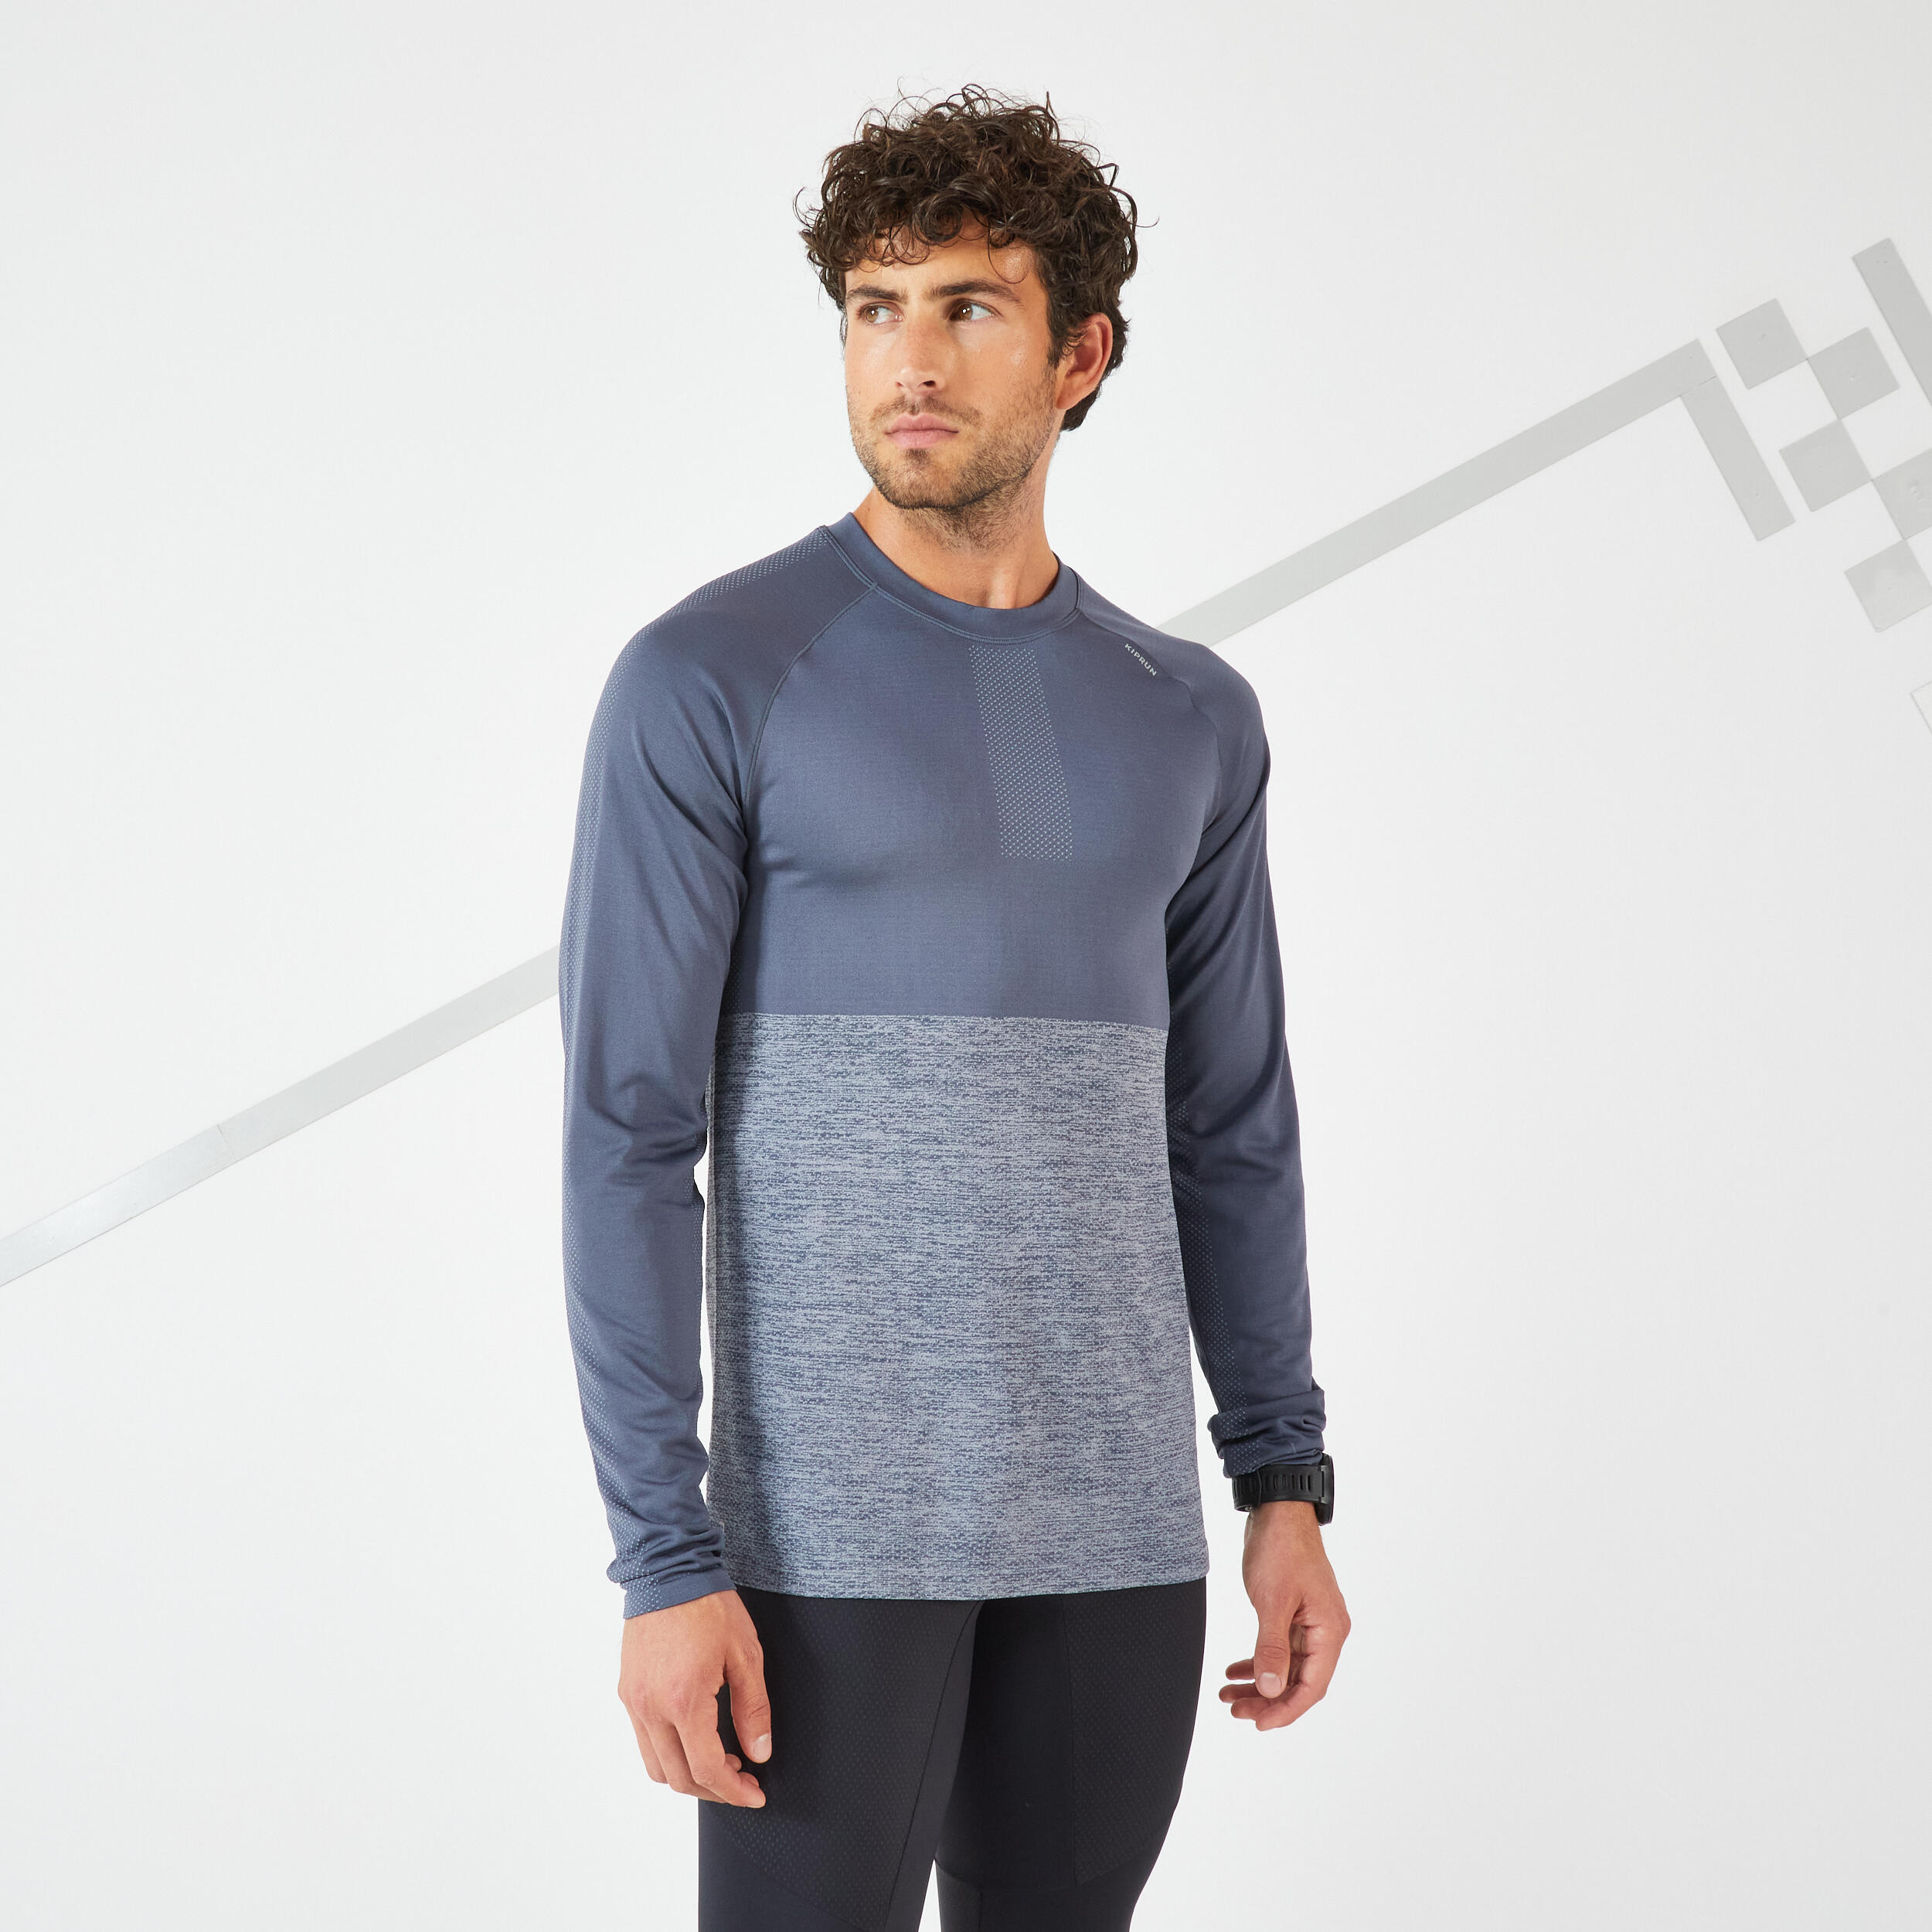 KIPRUN CARE MEN'S BREATHABLE LONG-SLEEVED RUNNING T-SHIRT - GREY LIMITED EDITION 1/9